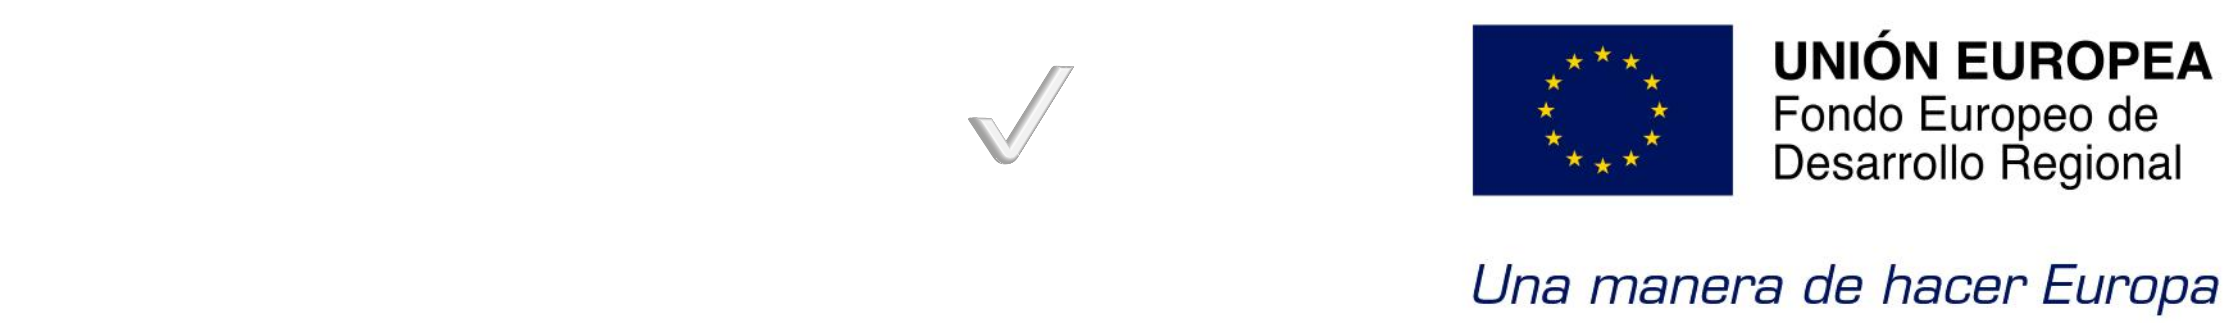 Ivace